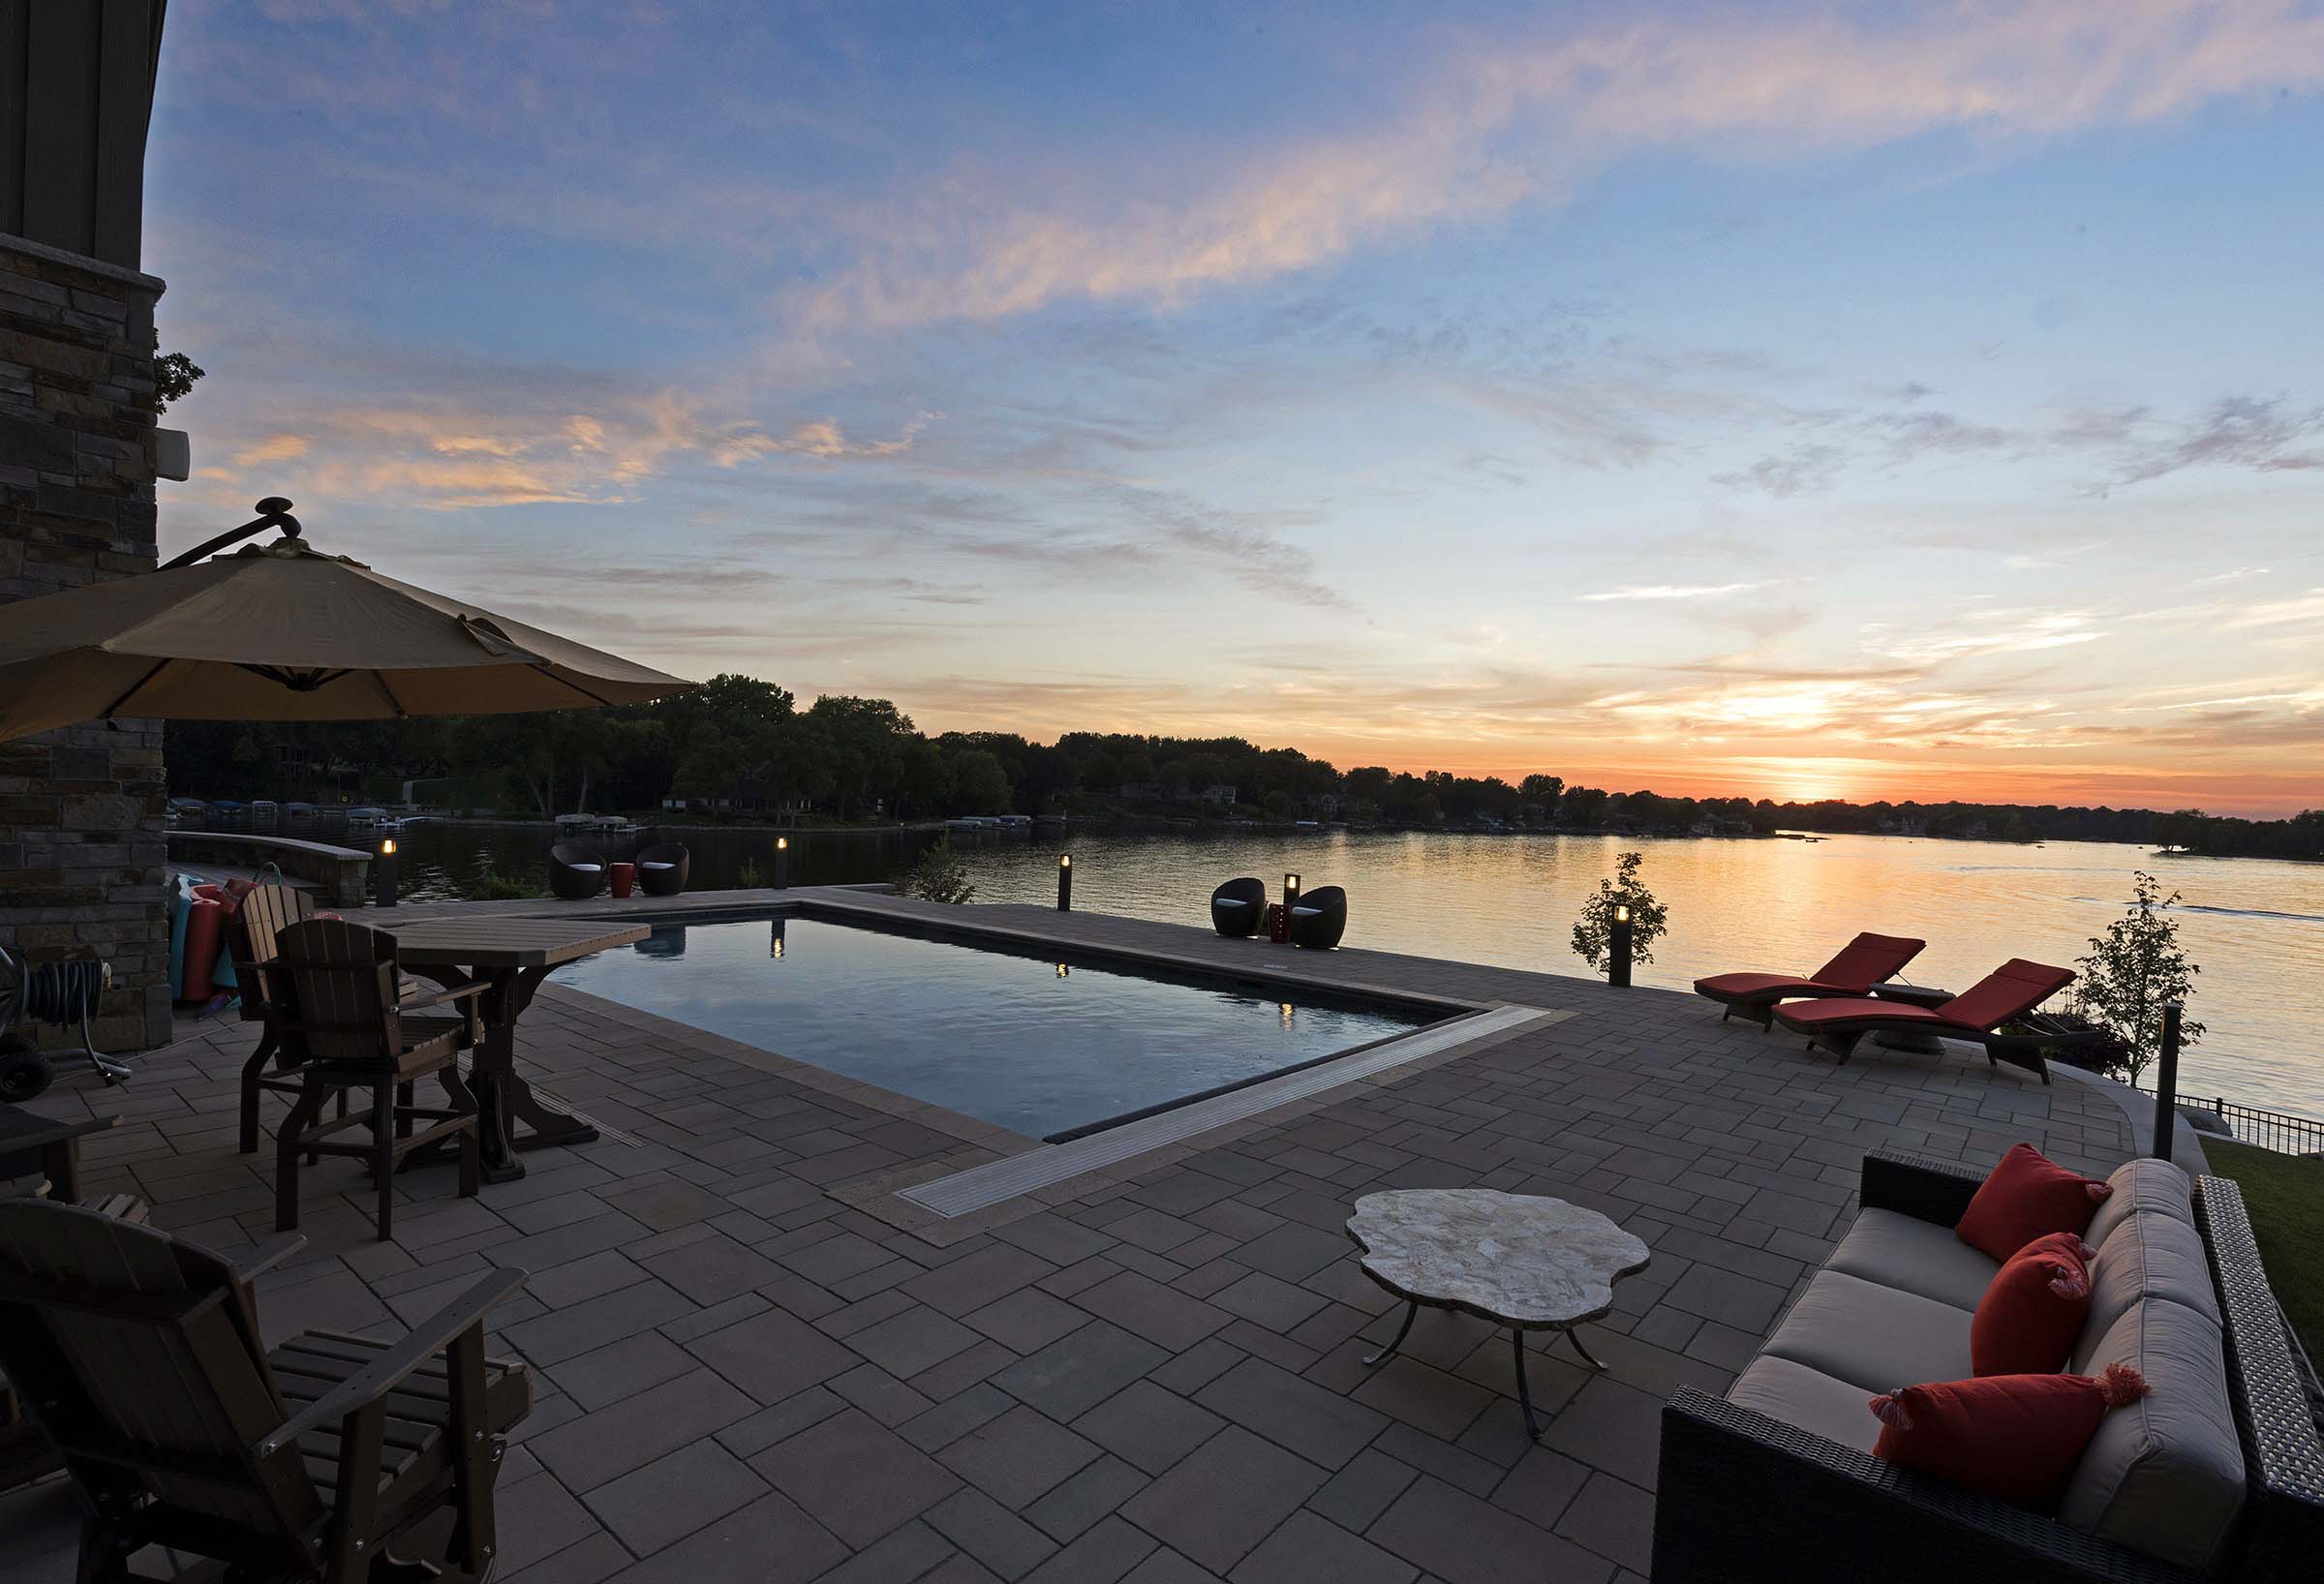 Sunset view from a large pool with multiple seating areas near the lake.